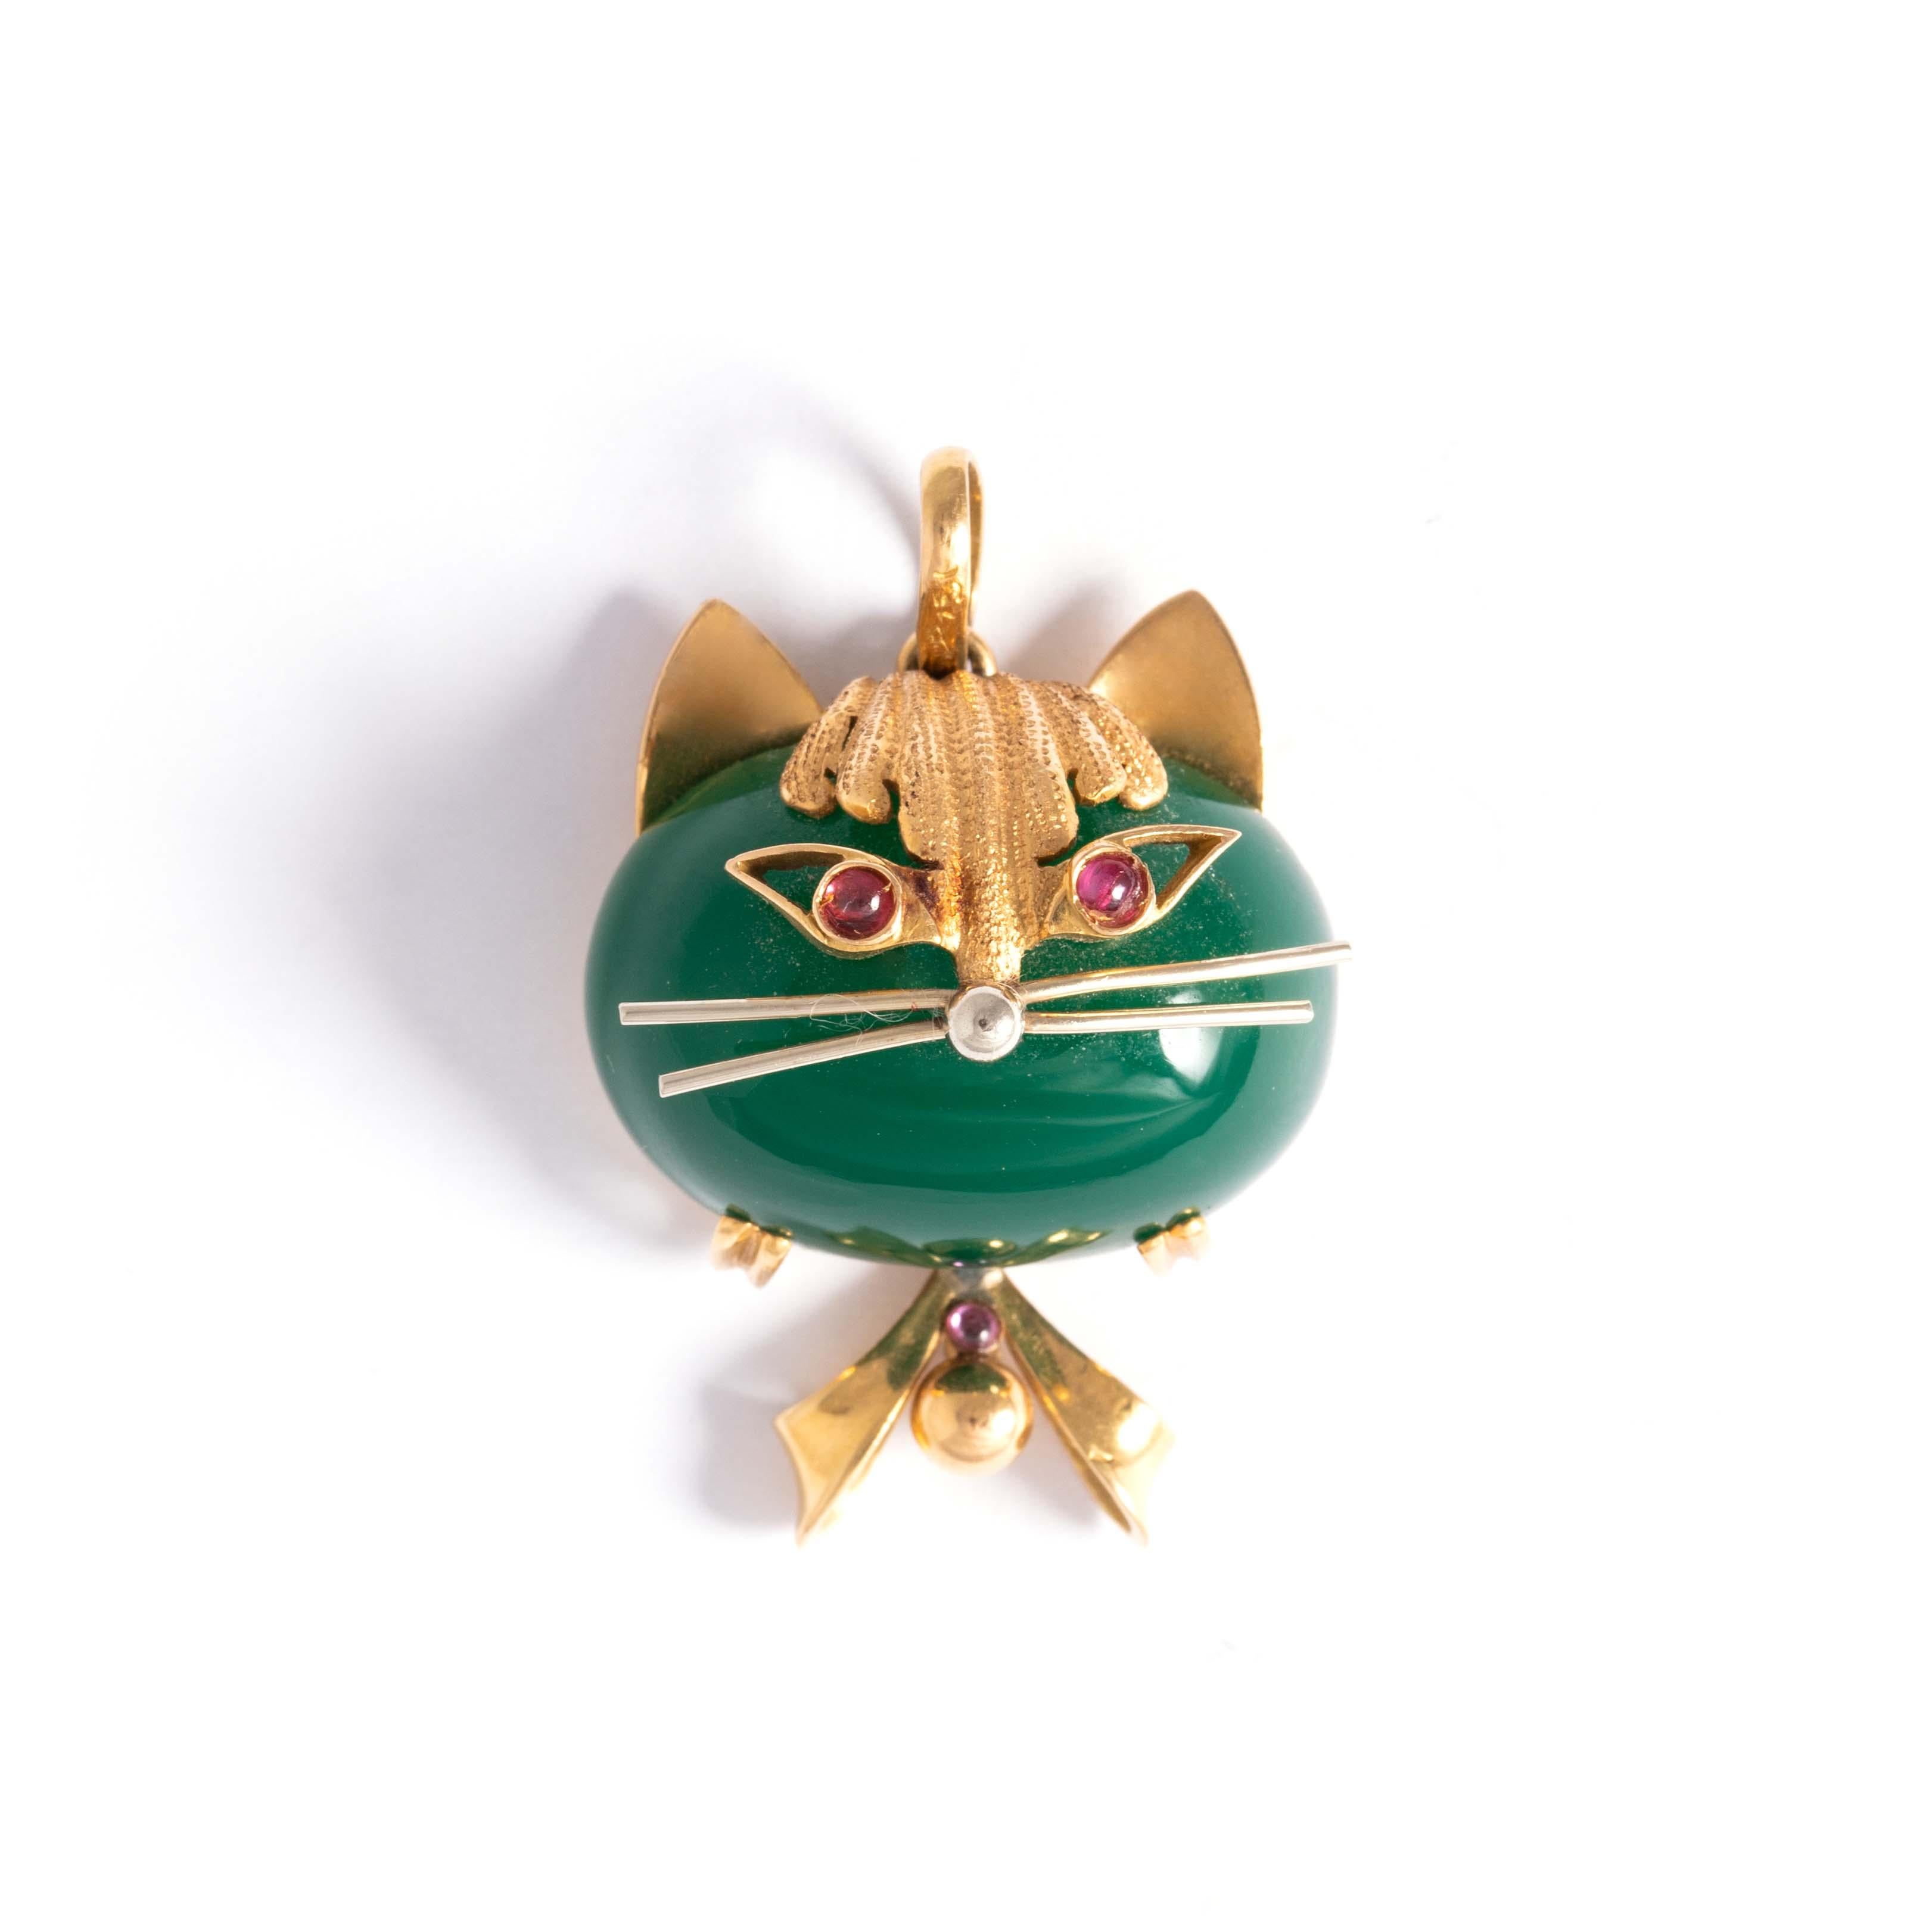 18K gold pendant representing a cat and holding a green cabochon stone. The eyes respectively set with a red cabochon stone.
Dimensions: 3.70 centimeters x 2.50 centimeters. 
Gross weight: 13.73 grams.